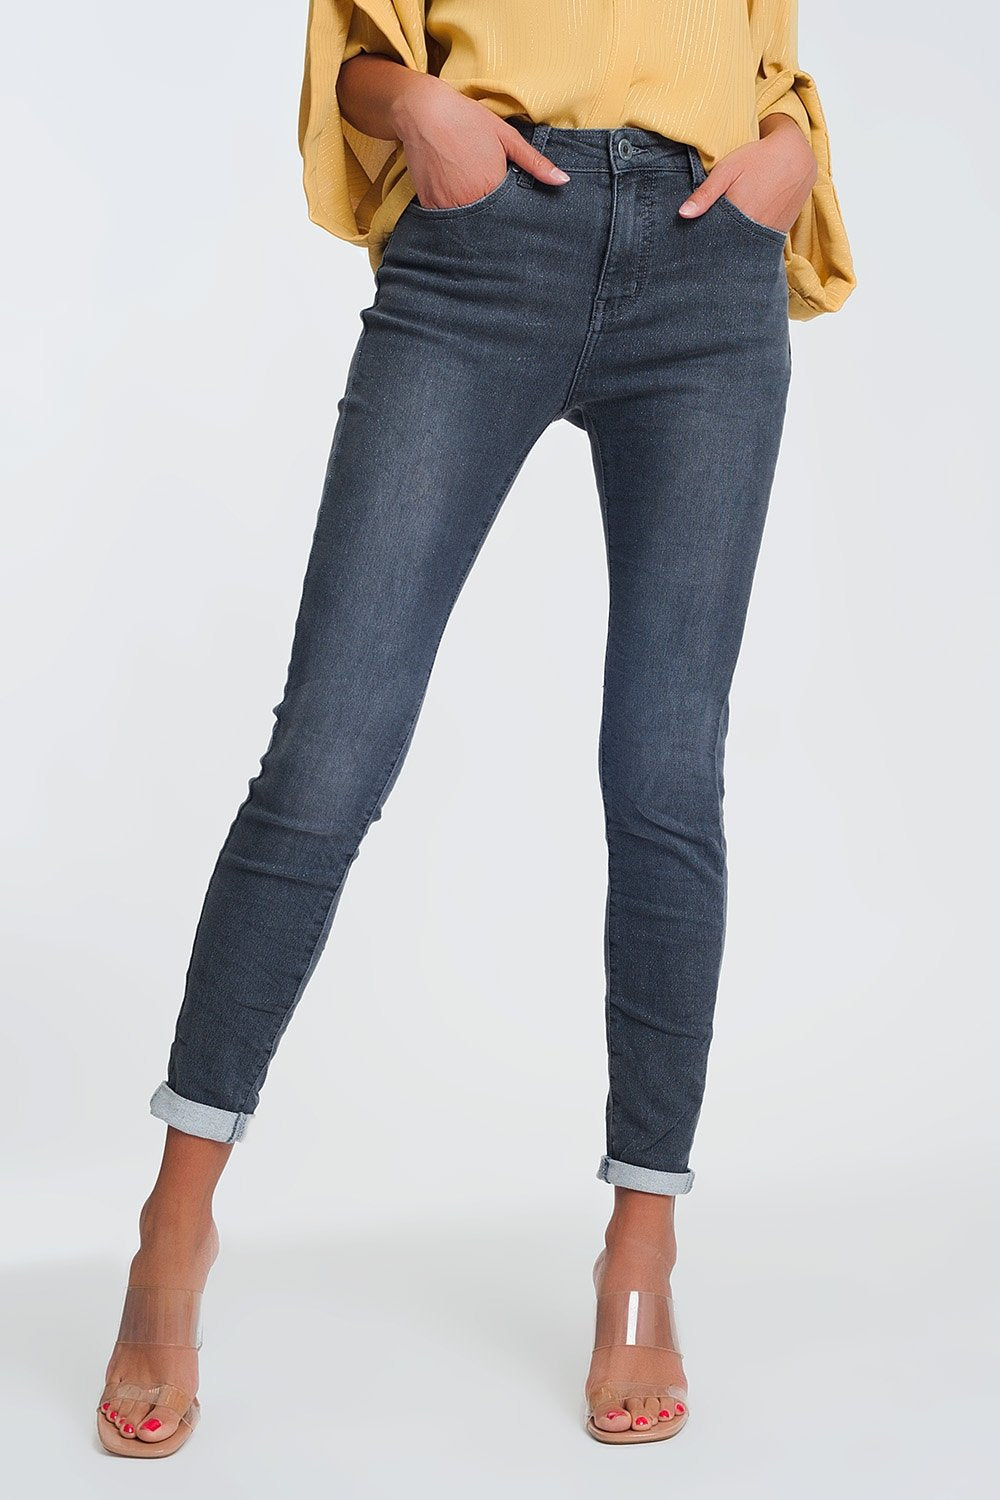 High Waisted Denim Jeans in Glitter Fabric - LOLA LUXE